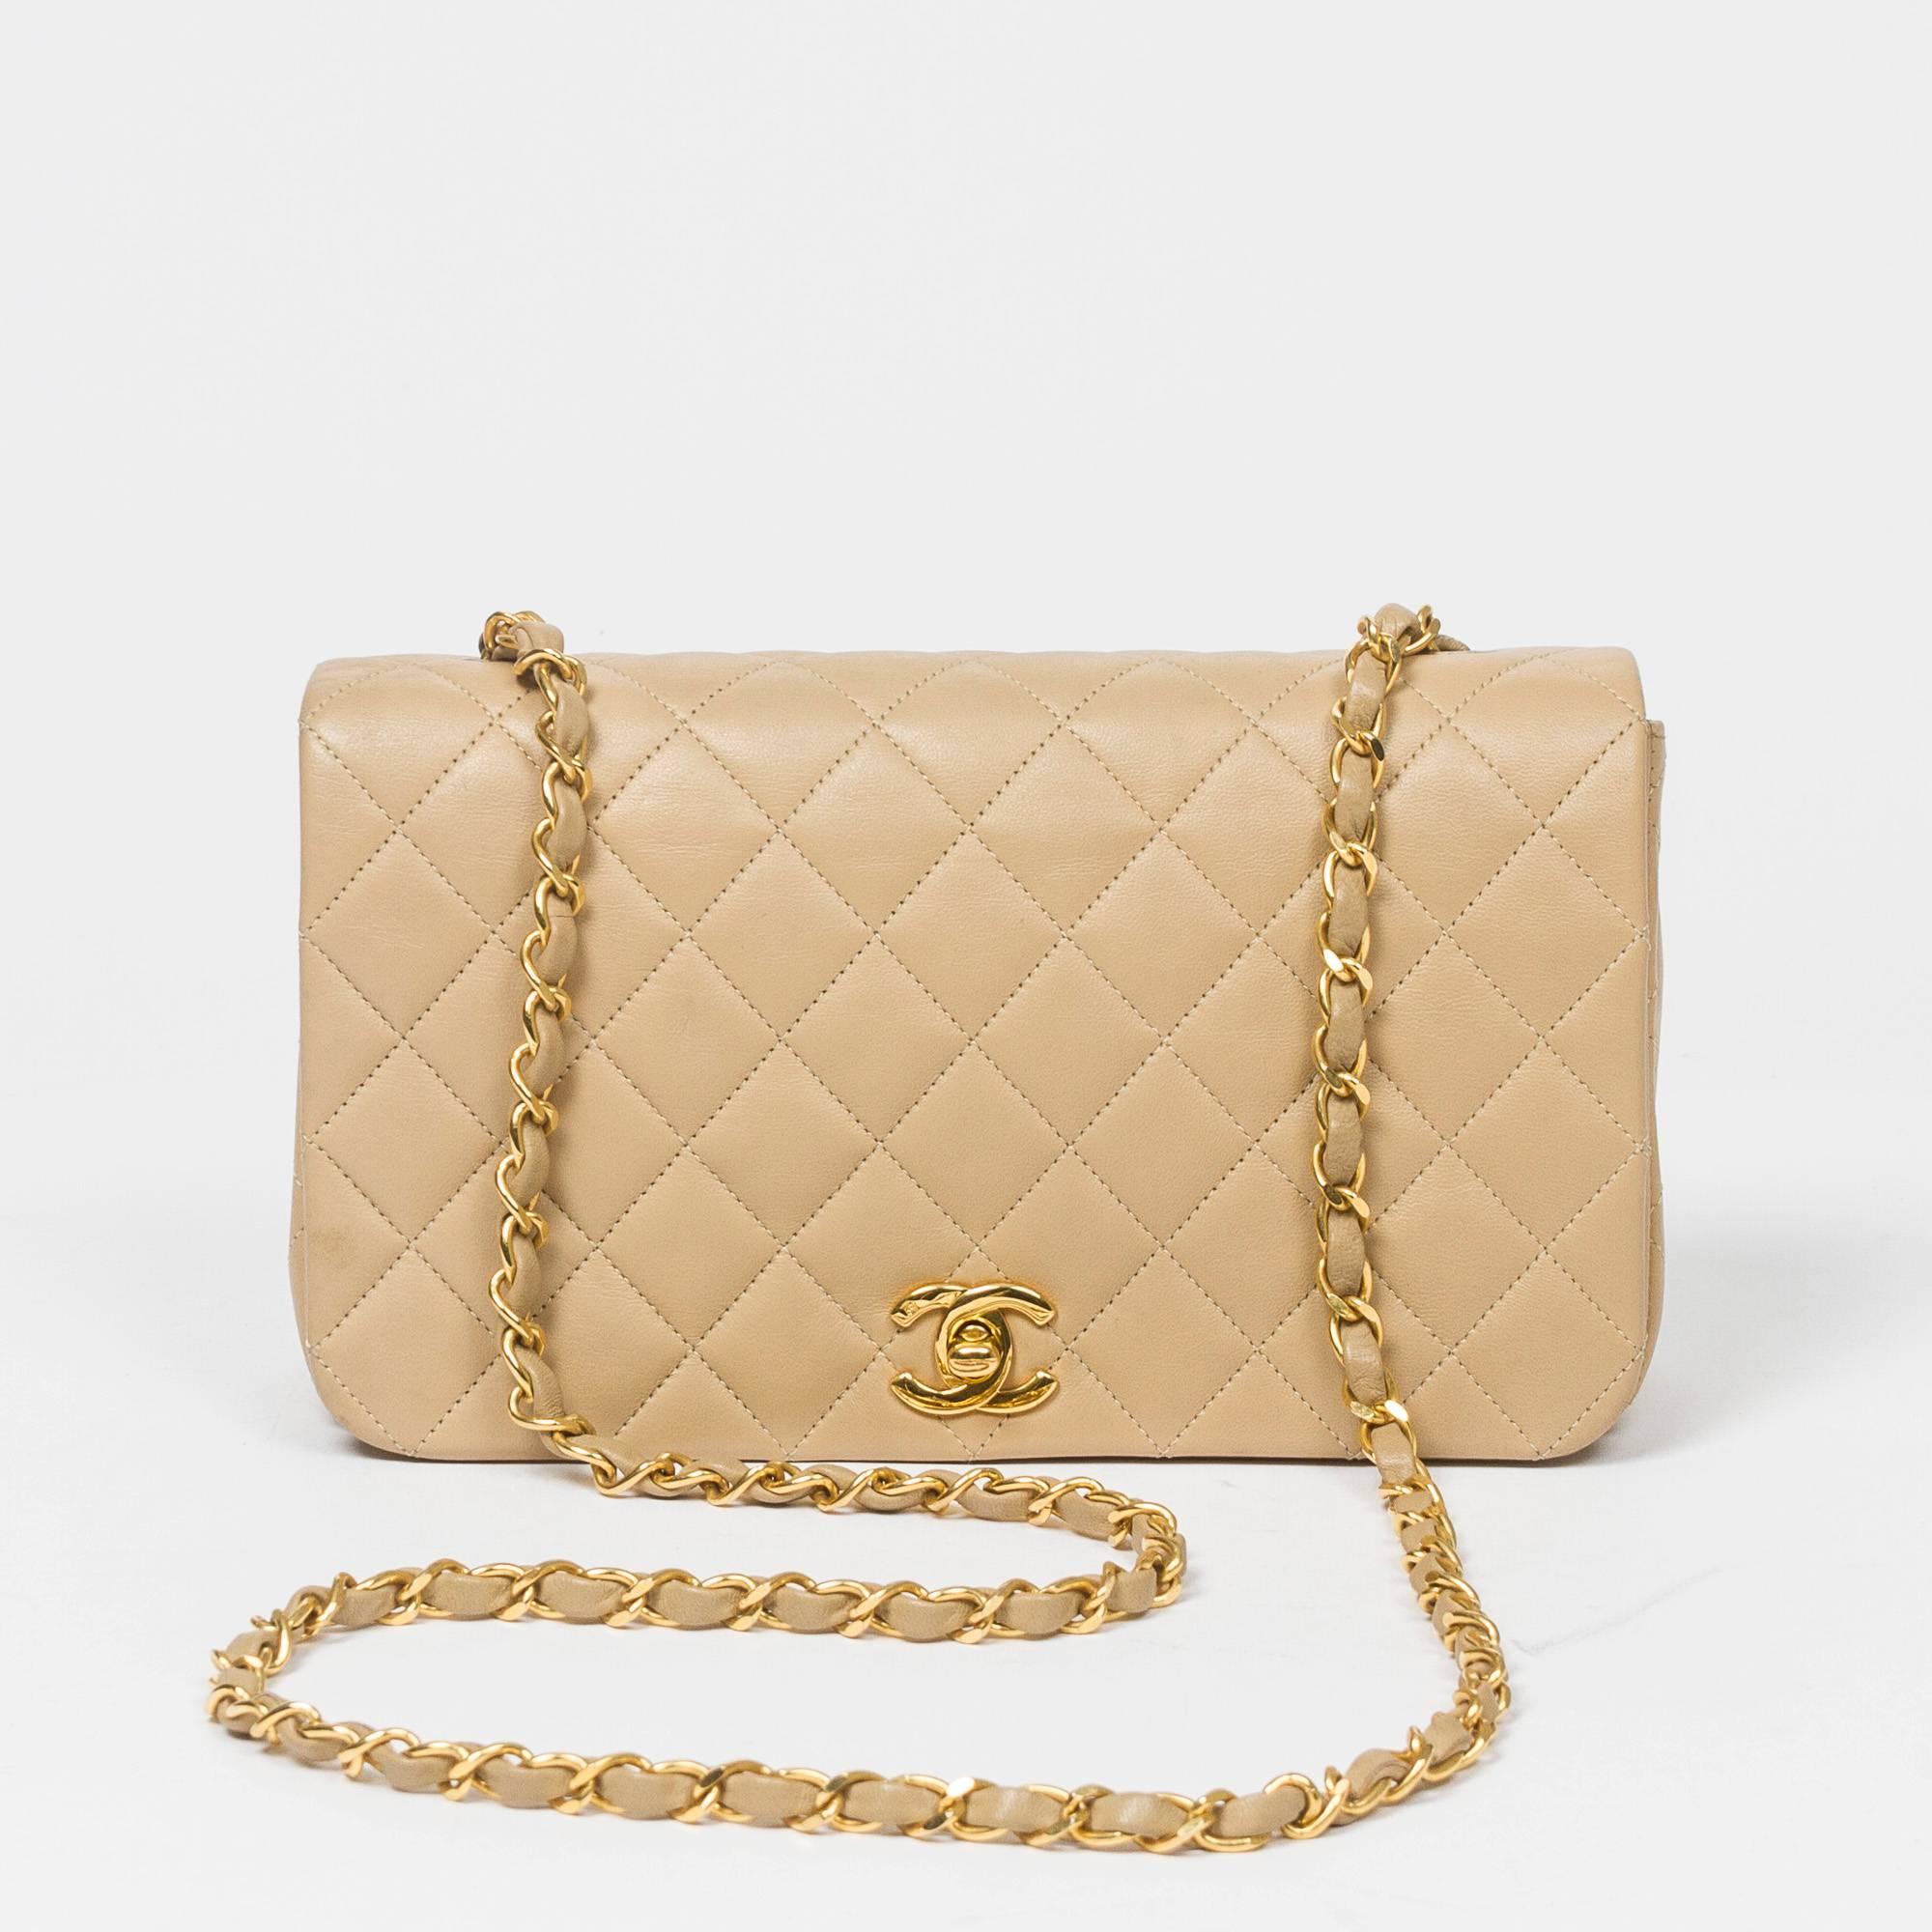 Chanel - Vintage Full Flap Bag Beige Quilted Leather 2